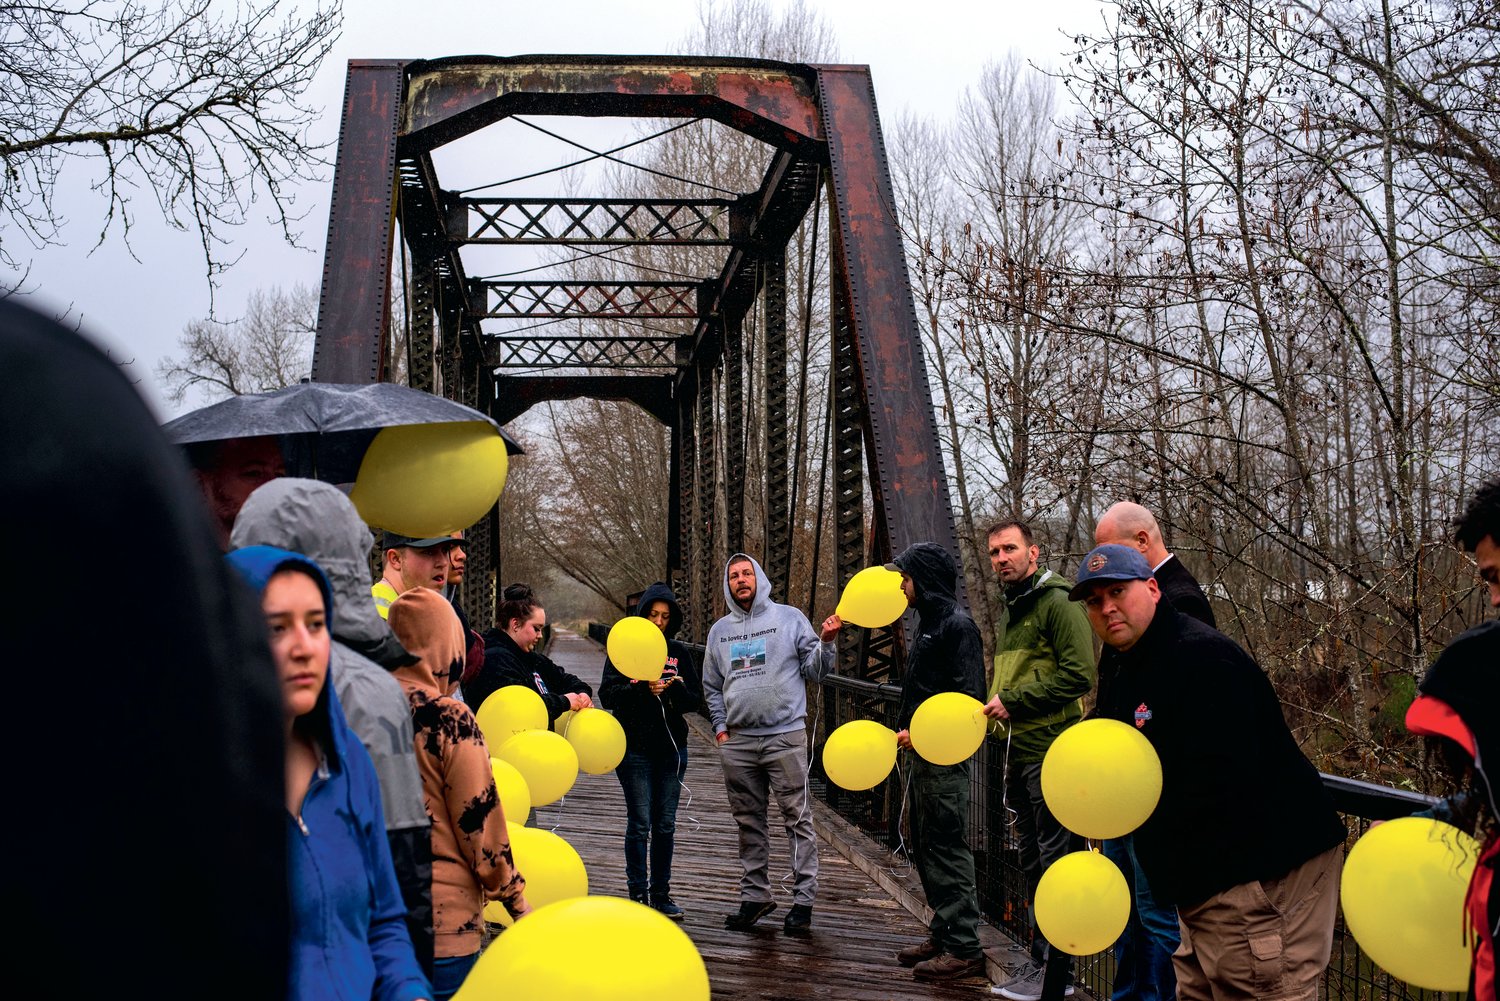 Family and friends hold balloons in the rain before releasing them into the air during an event marking one year since Zachary Rager lost his life.